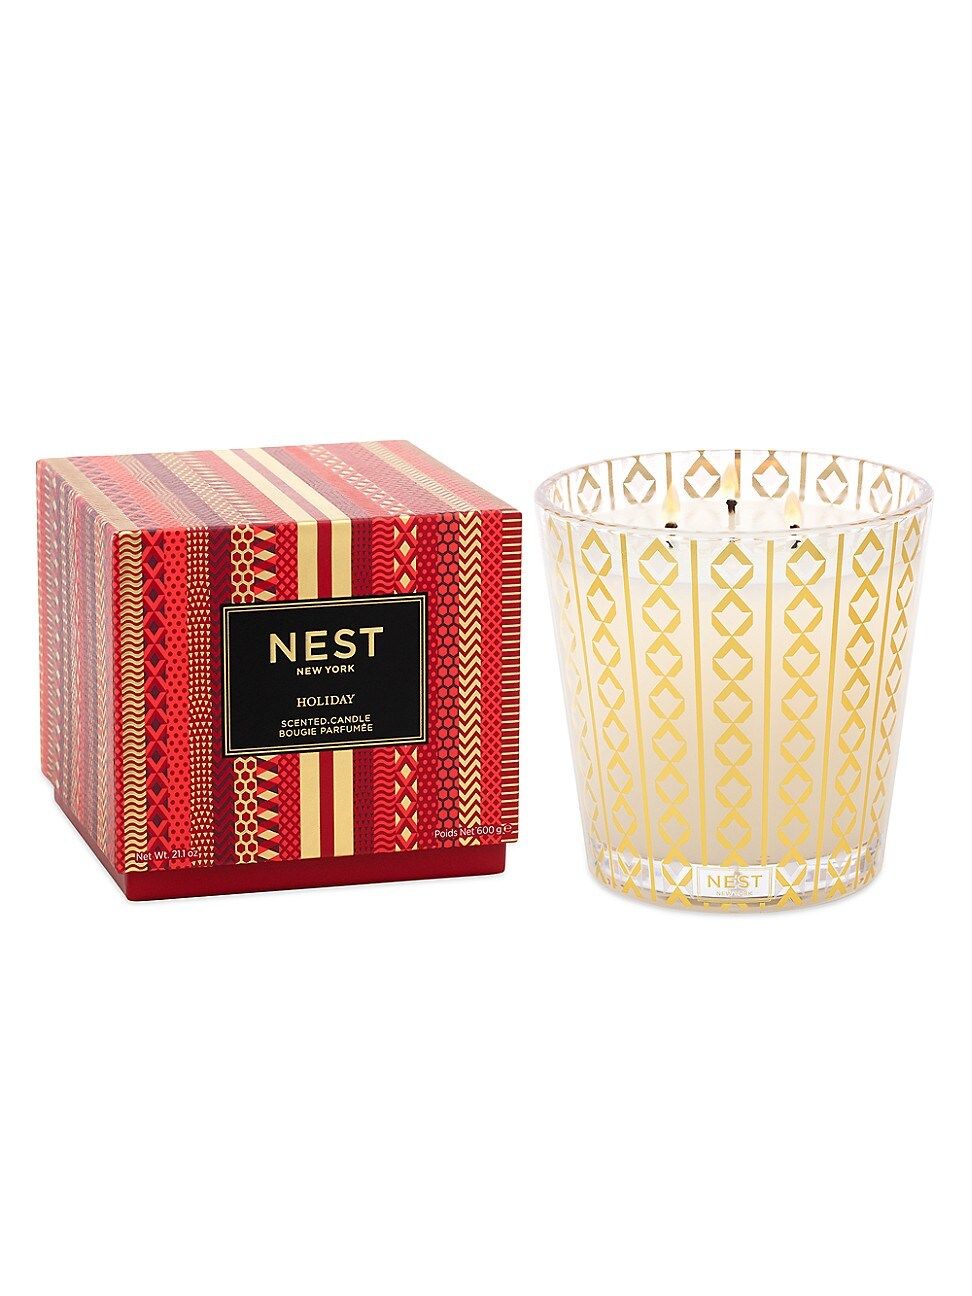 Nest Fragrances Holiday 3-Wick Scented Candle | Saks Fifth Avenue